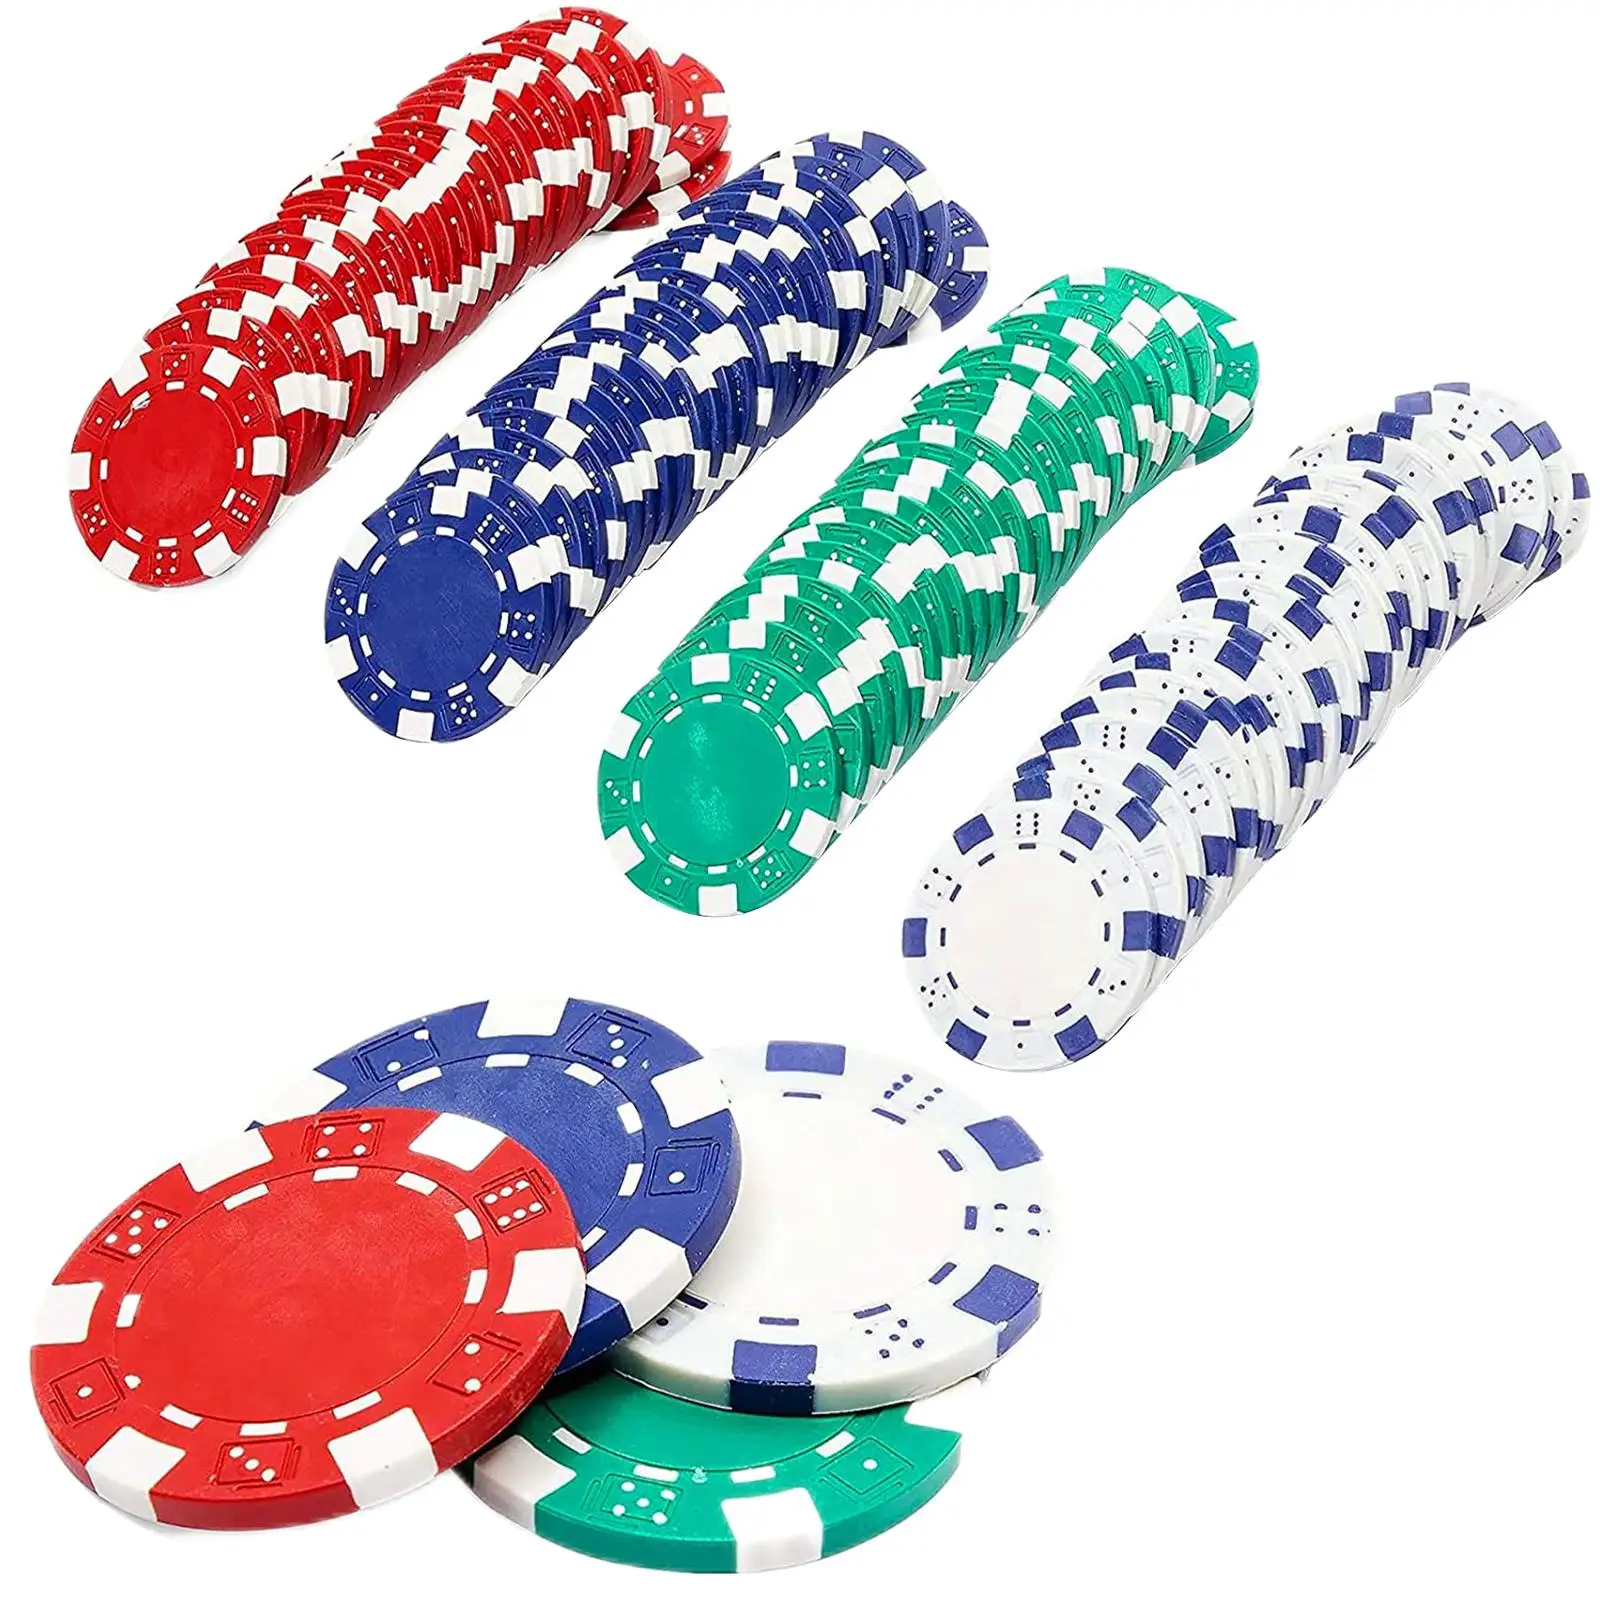 100 Pieces 4cm Poker Chips Multicolor Bingo Chips Markers Counting Discs for Party Activities Poker Bingo Accessories Part